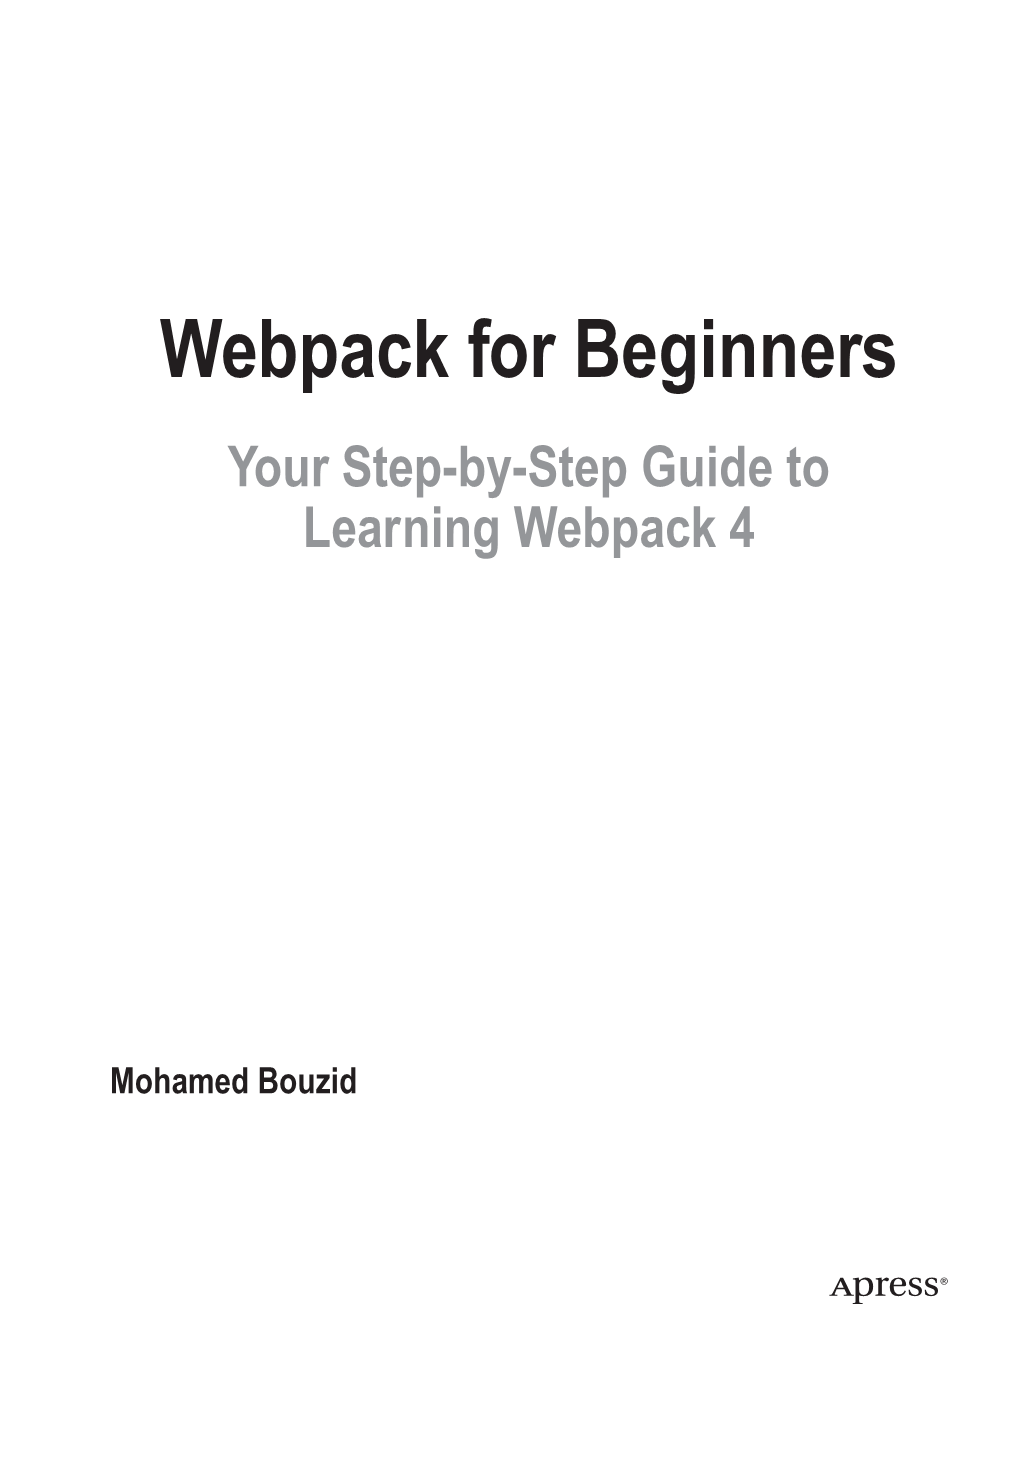 Webpack for Beginners Your Step-By-Step Guide to Learning Webpack 4